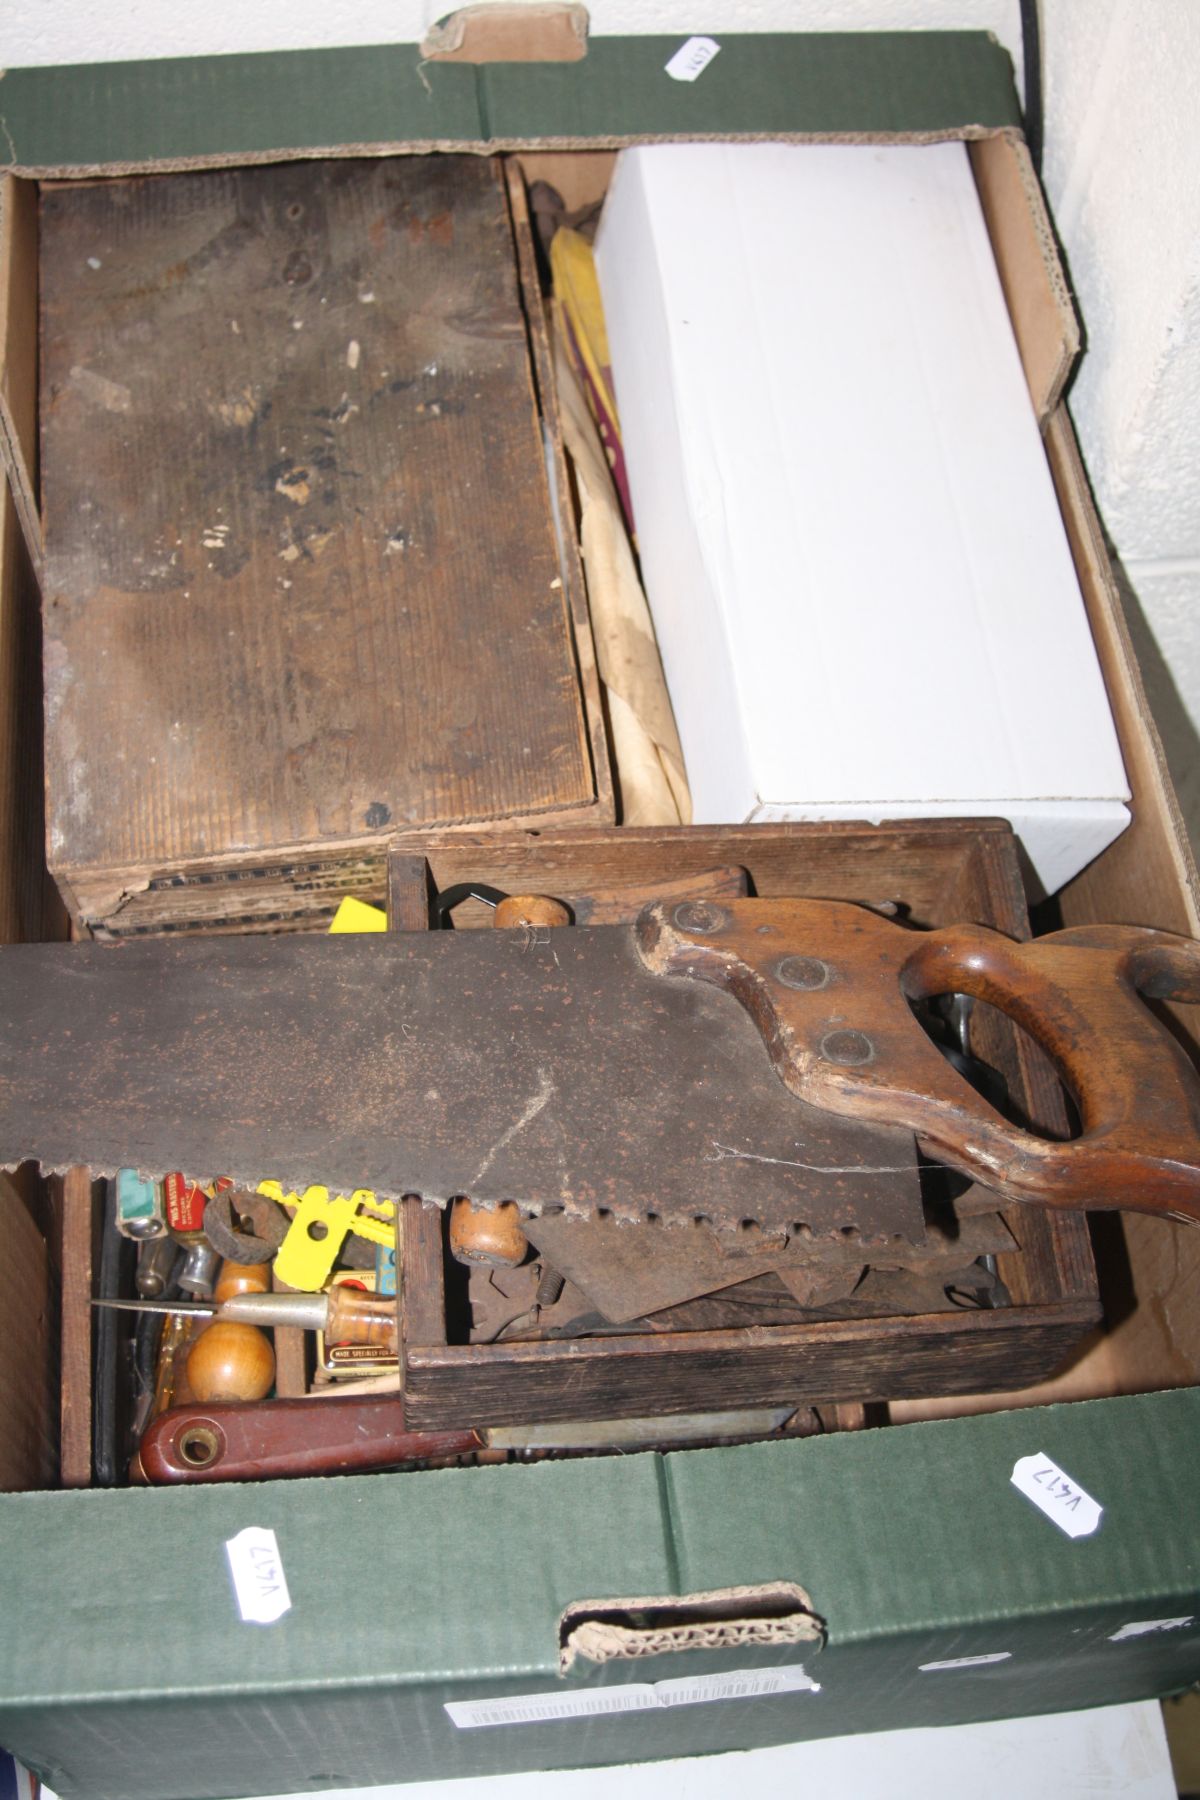 FIVE BOXES OF VARIOUS HAND TOOLS, to include planes, saws, hand sythes, files, chizels, hammers, - Image 13 of 14